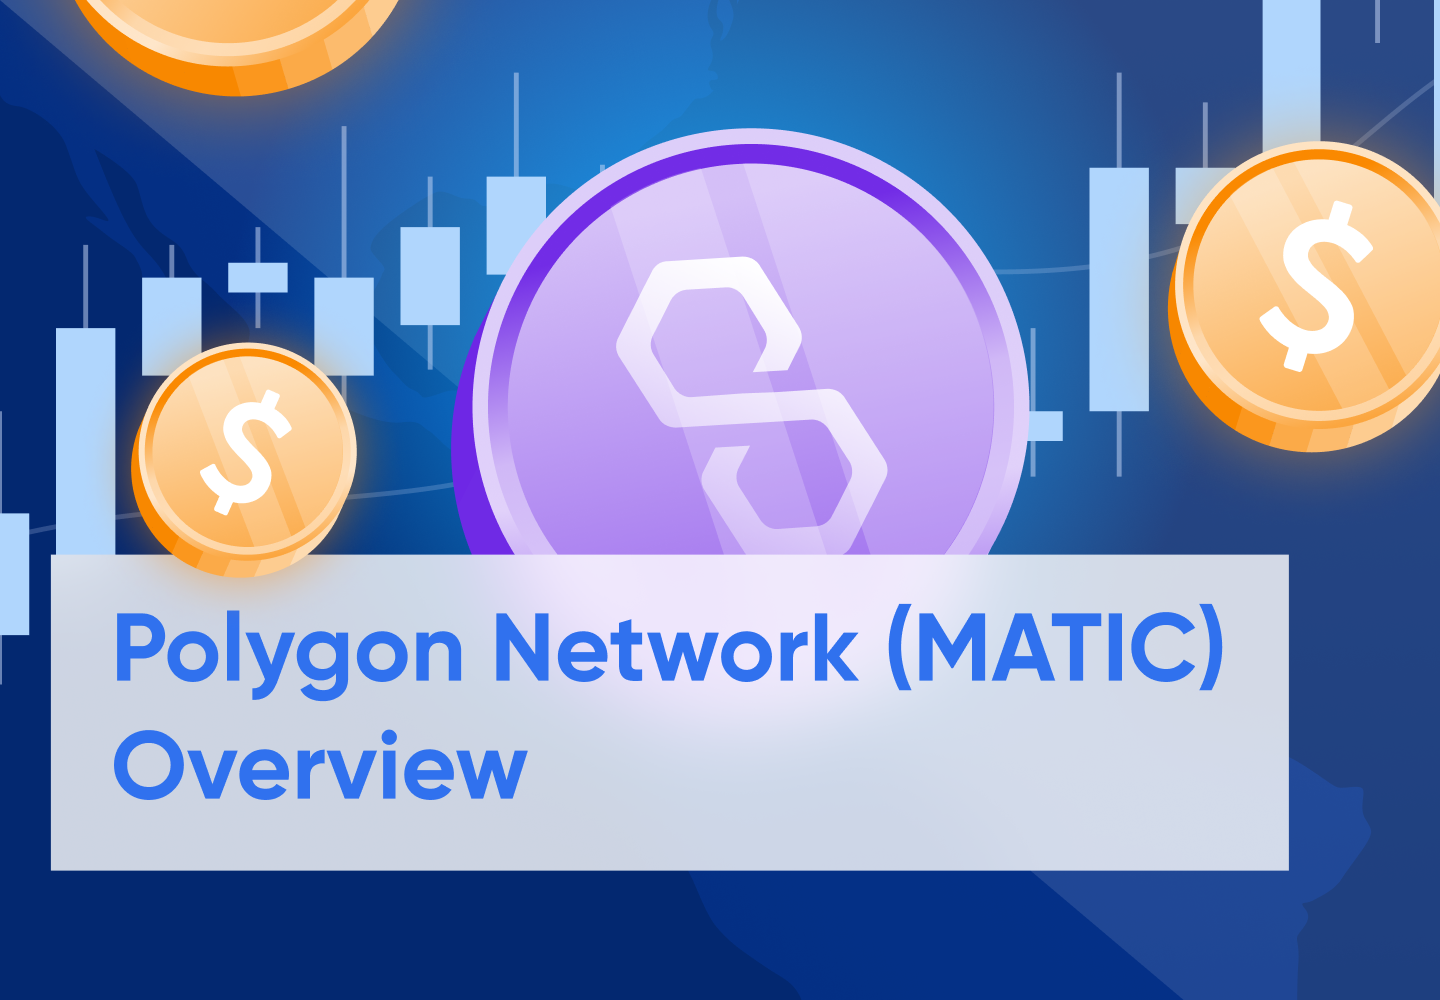 What is Polygon (MATIC)?